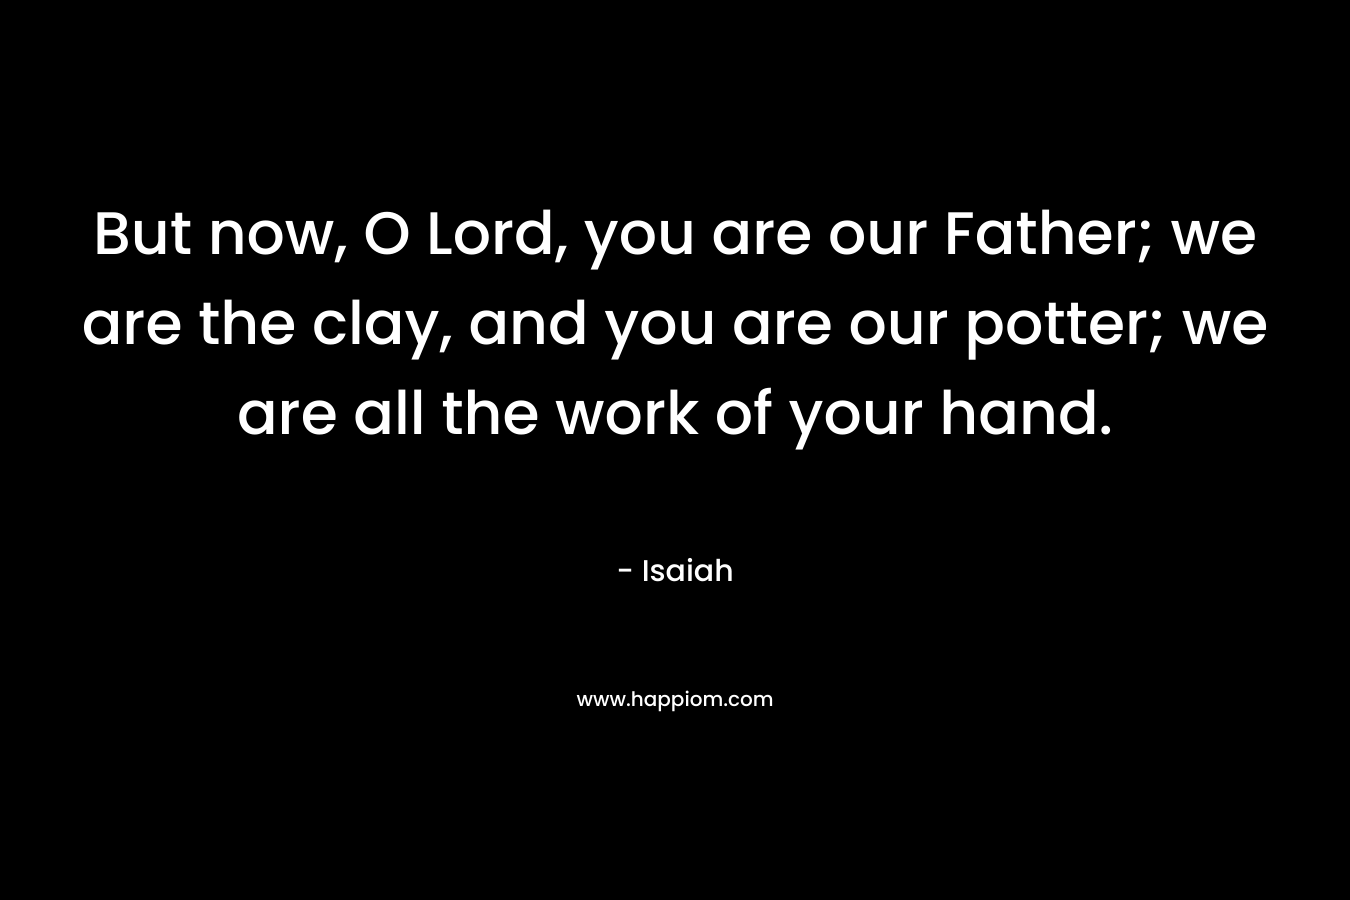 But now, O Lord, you are our Father; we are the clay, and you are our potter; we are all the work of your hand. – Isaiah